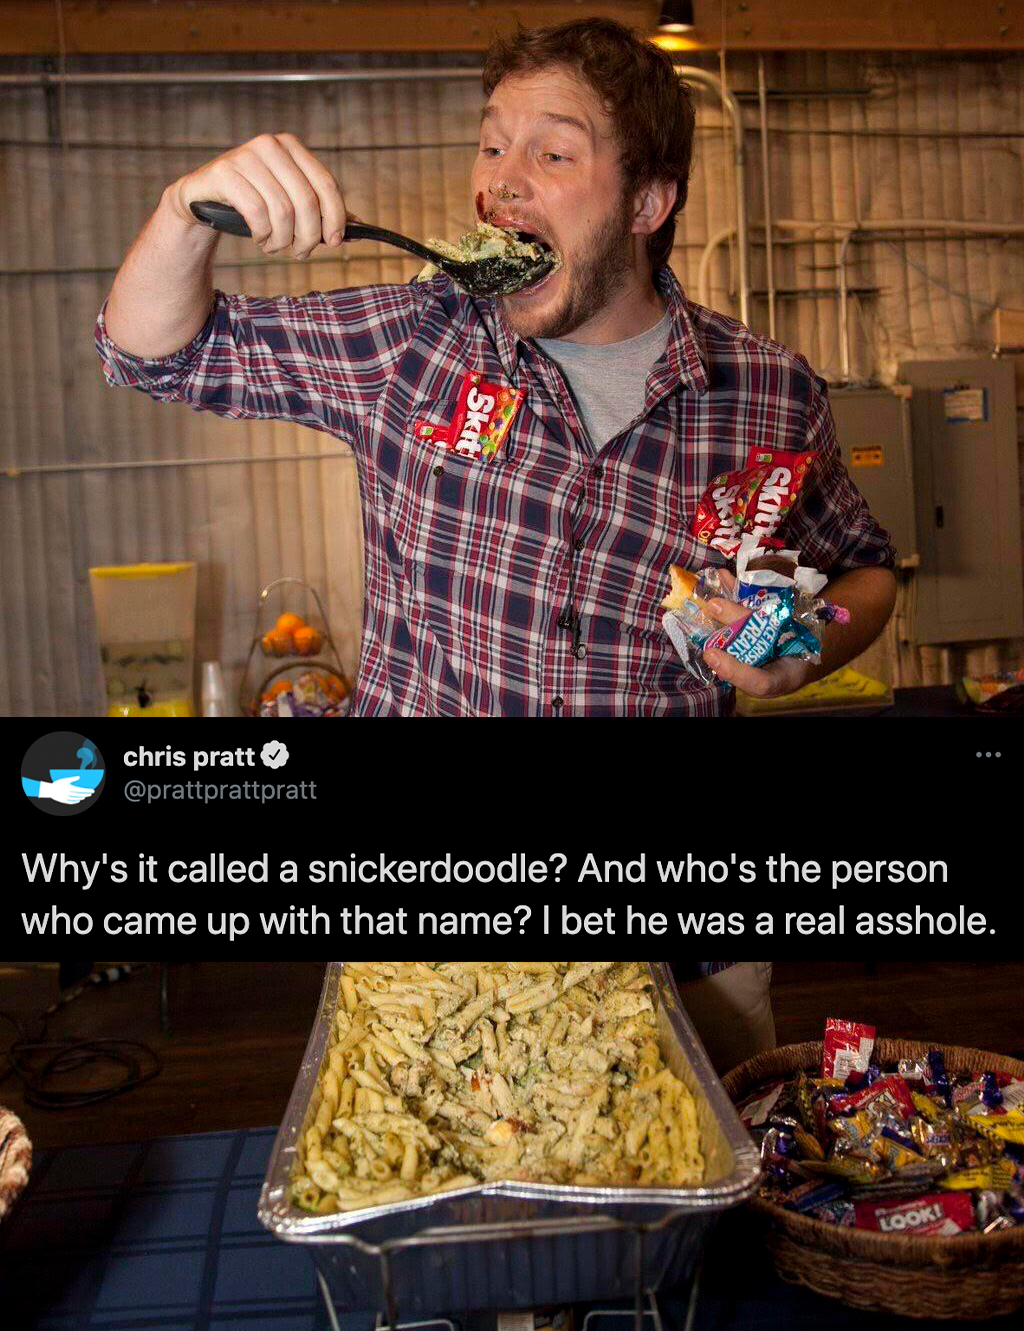 funny celebrity tweets - chris pratt Why's it called a snickerdoodle? And who's the person who came up with that name? I bet he was a real asshole.